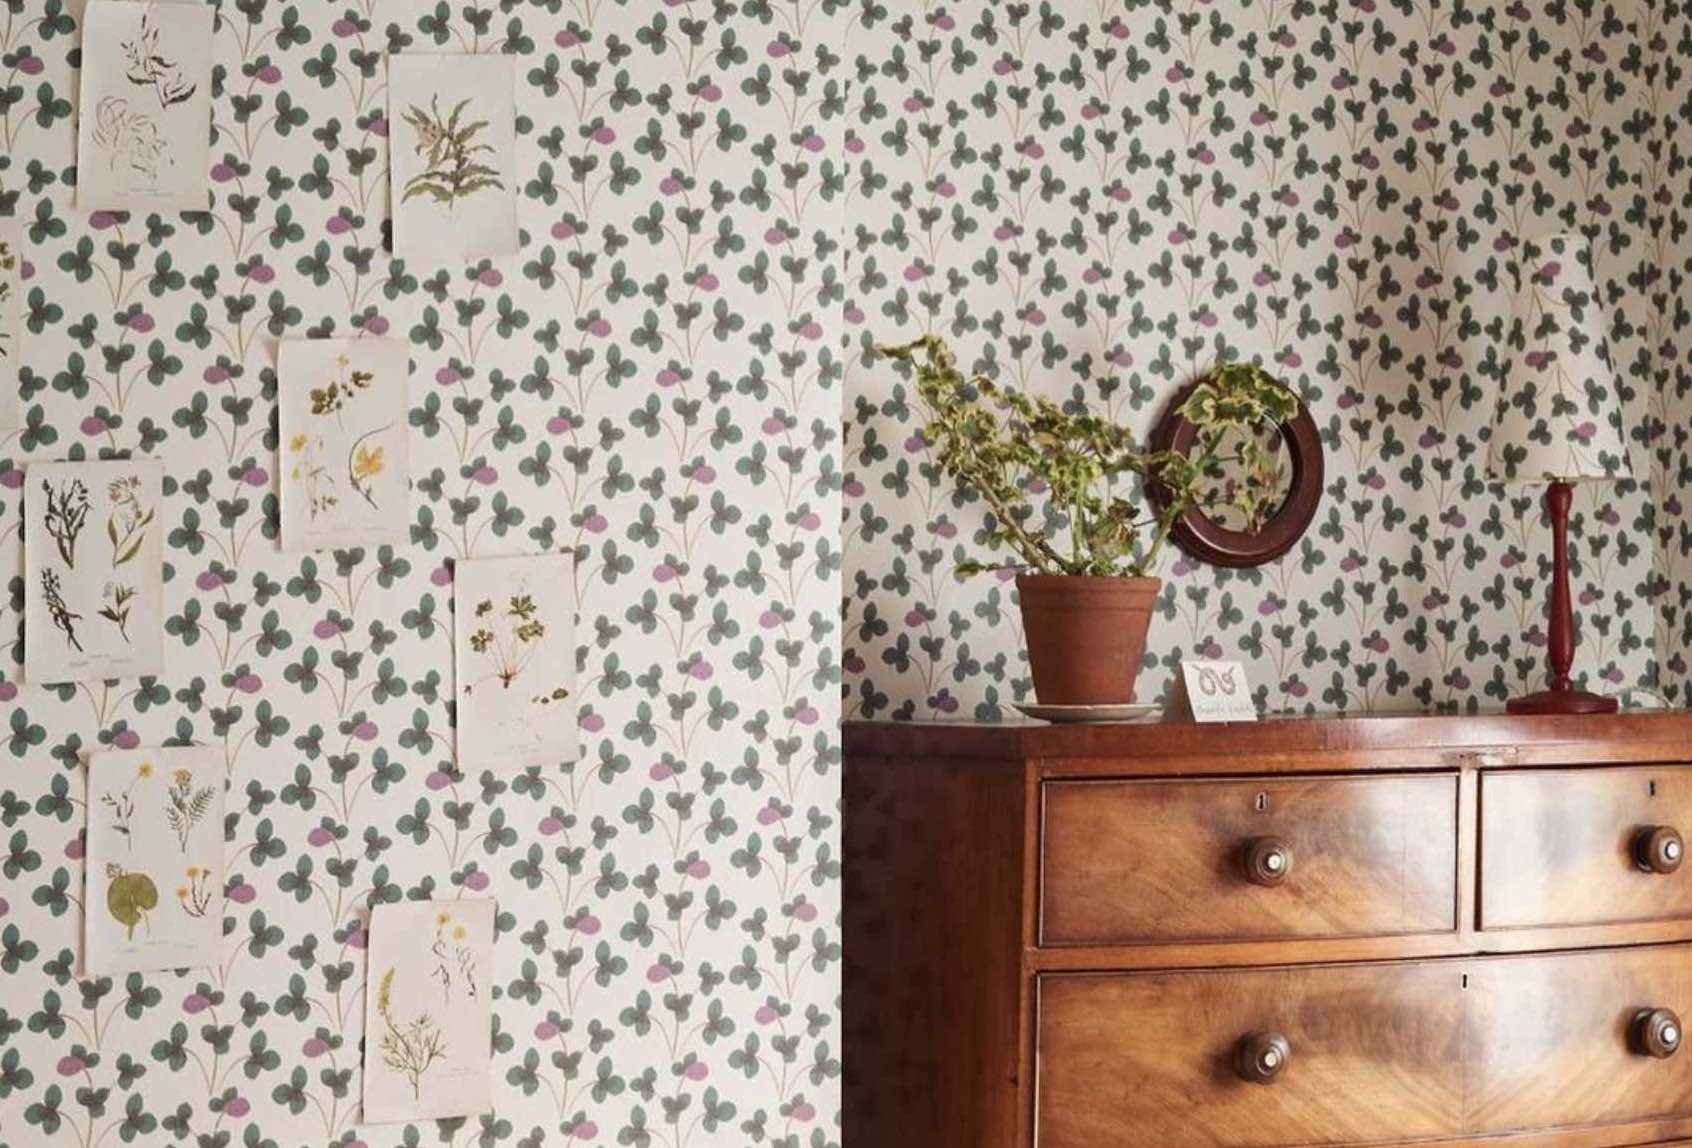 17 of My Favourite Wallpaper Patterns and What I Love About Every One | Wit & Delight